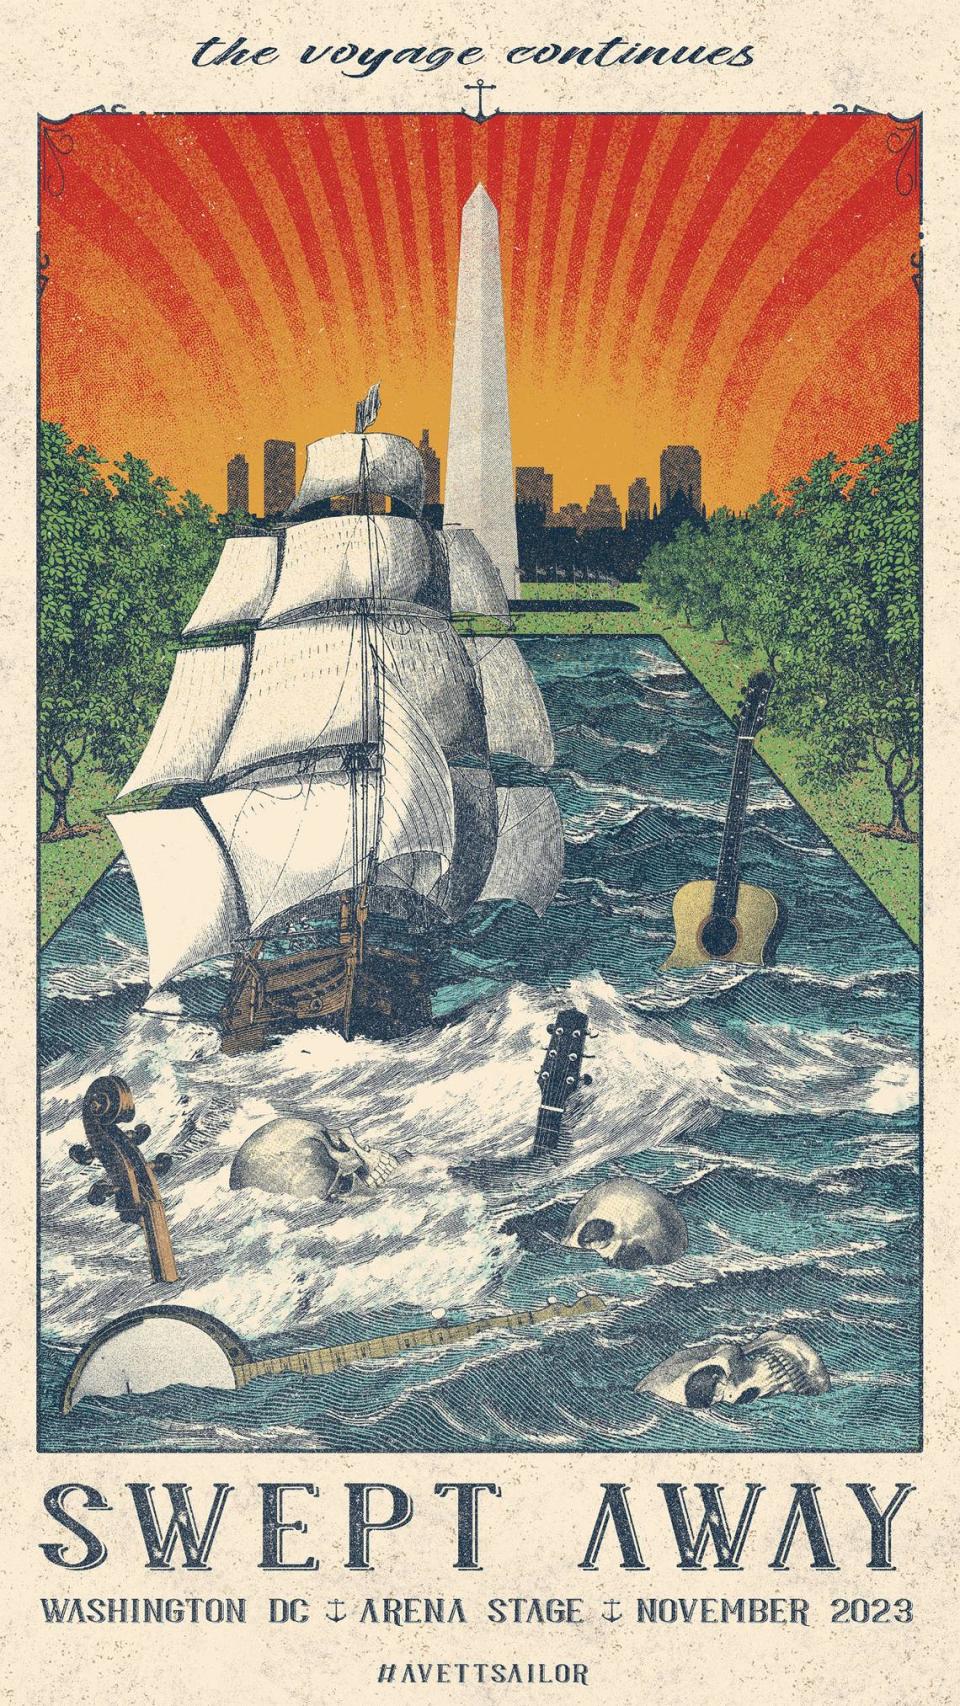 The Avett Brothers commissioned this posted by Tortuga Design Studio for the “Swept Away” run at Arena Stage in Washington, D.C.